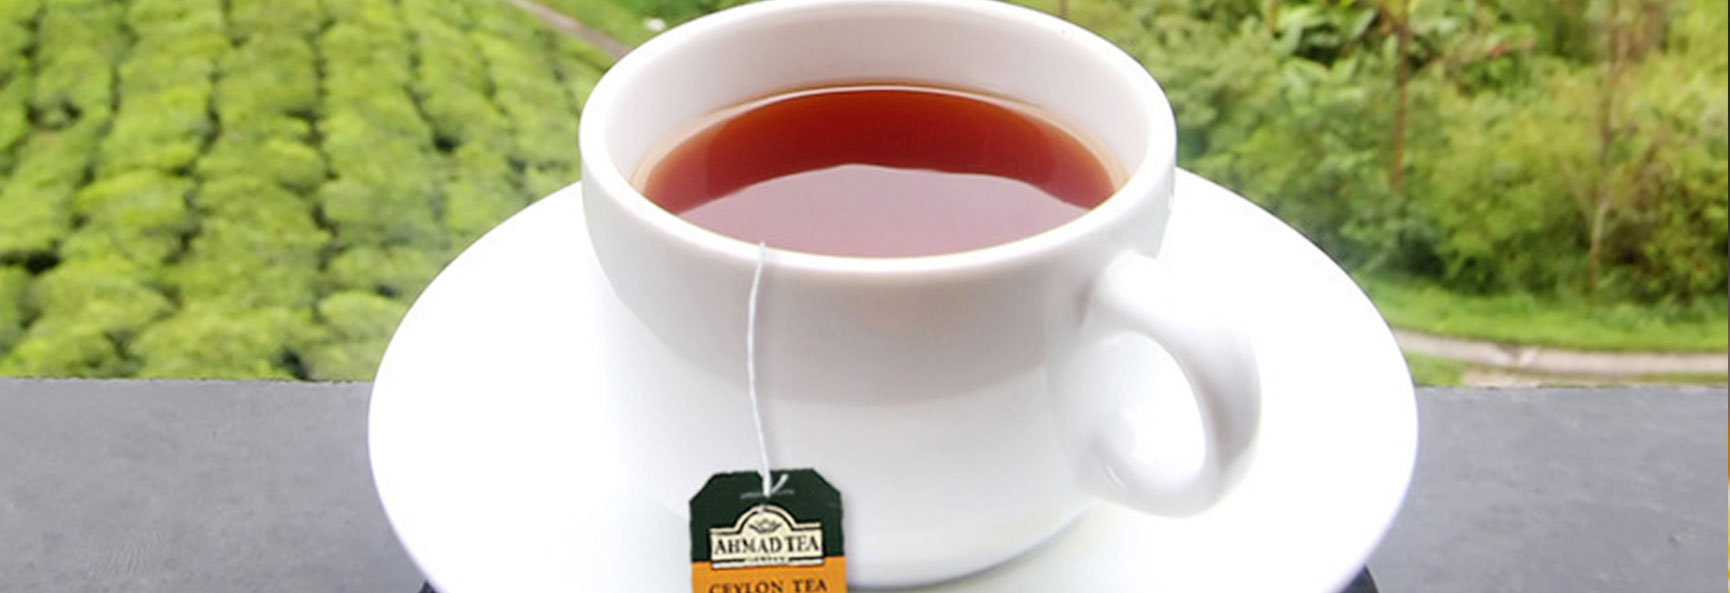 Tea and Cancer Risk Reduction